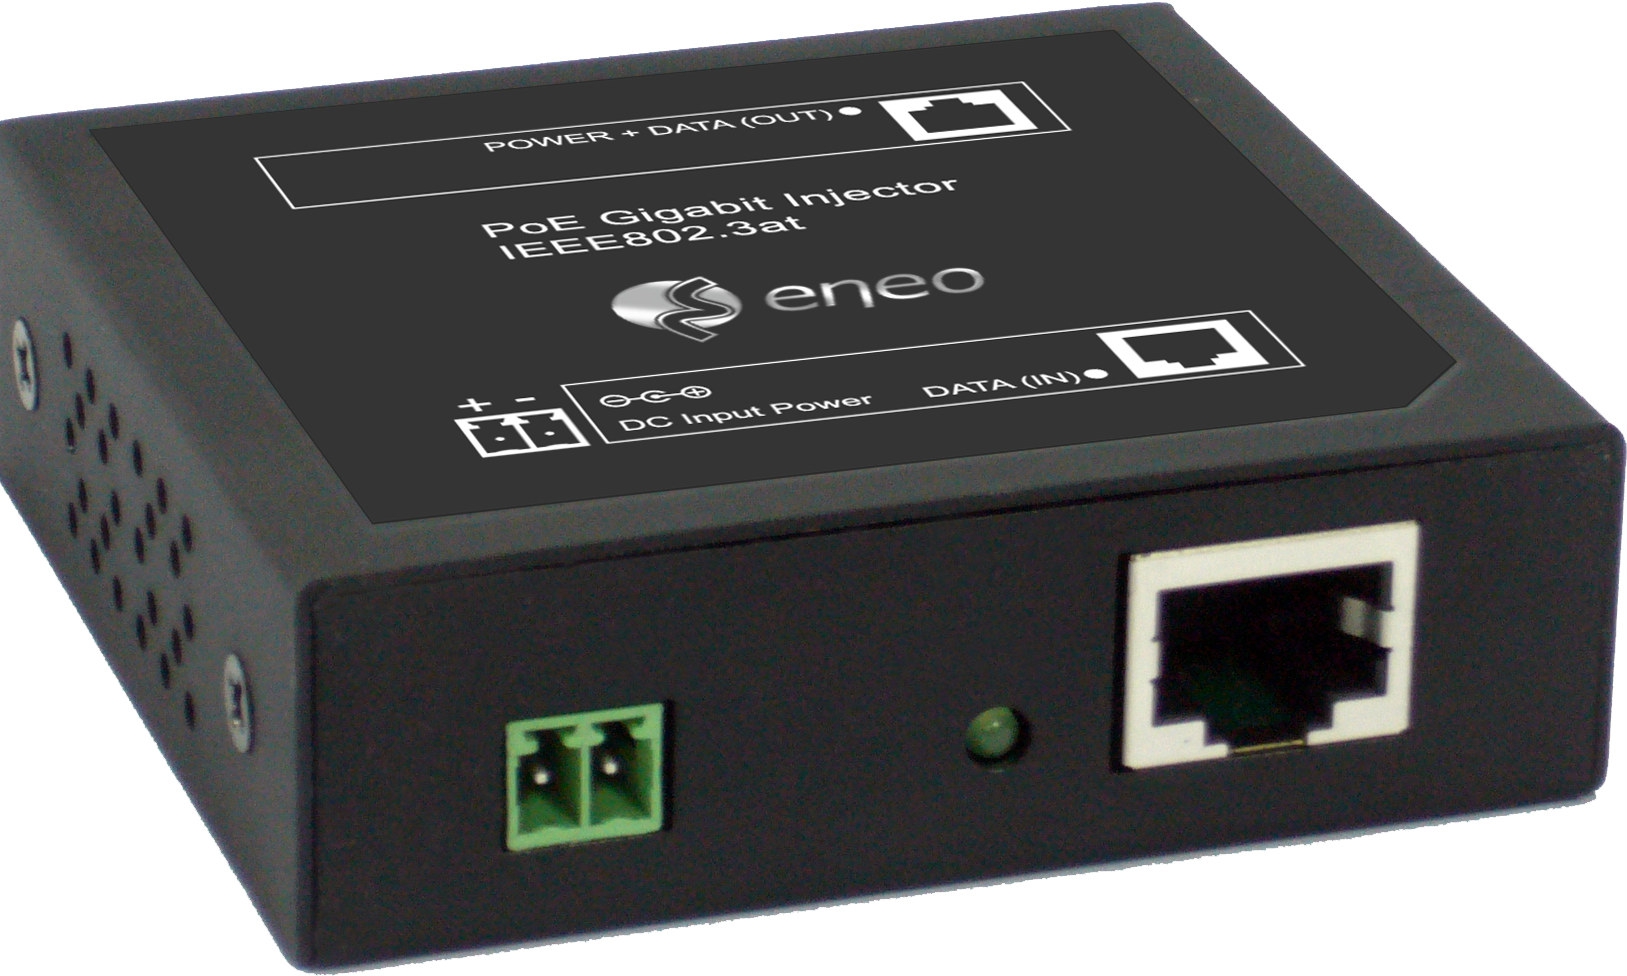 eneo supports its IP product portfolio with a purpose-designed, network component range.